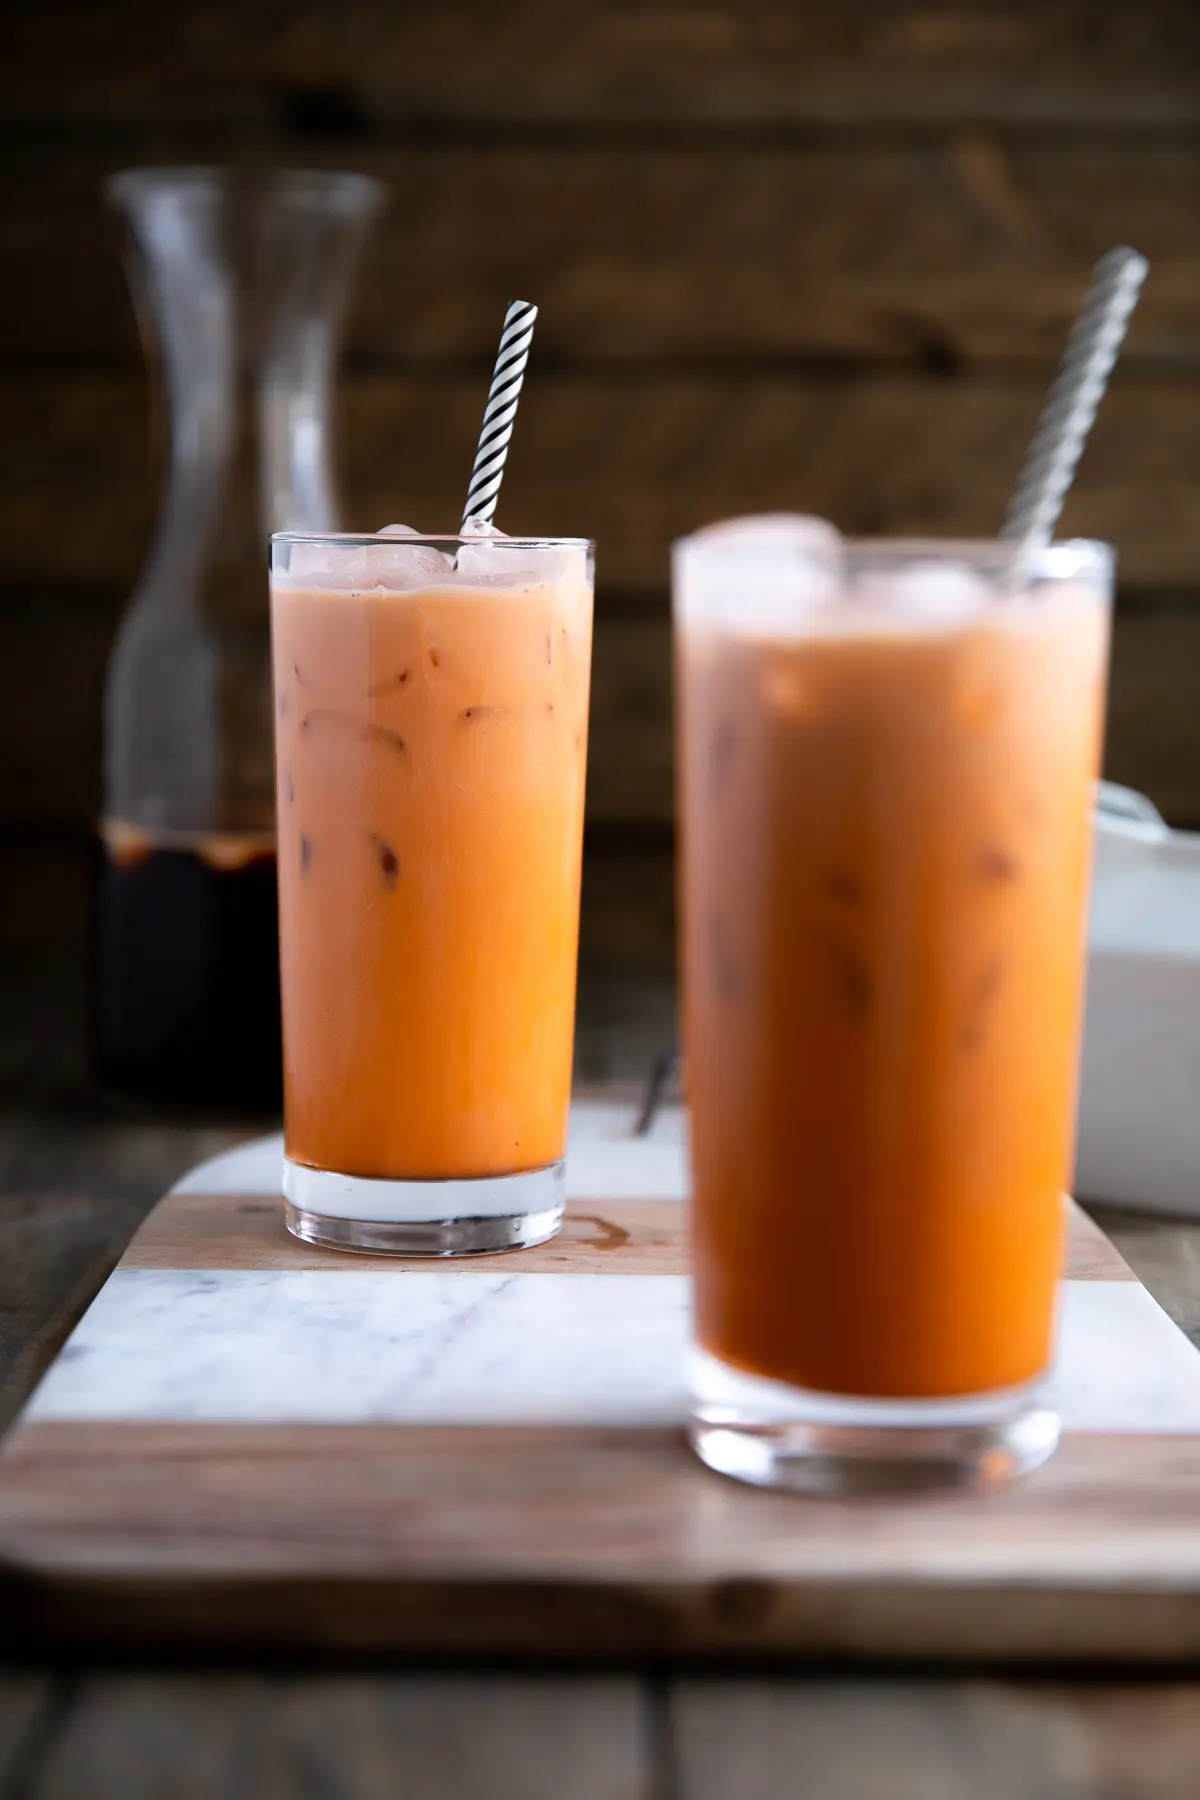 Thai iced tea served in a glass with black and white straw.